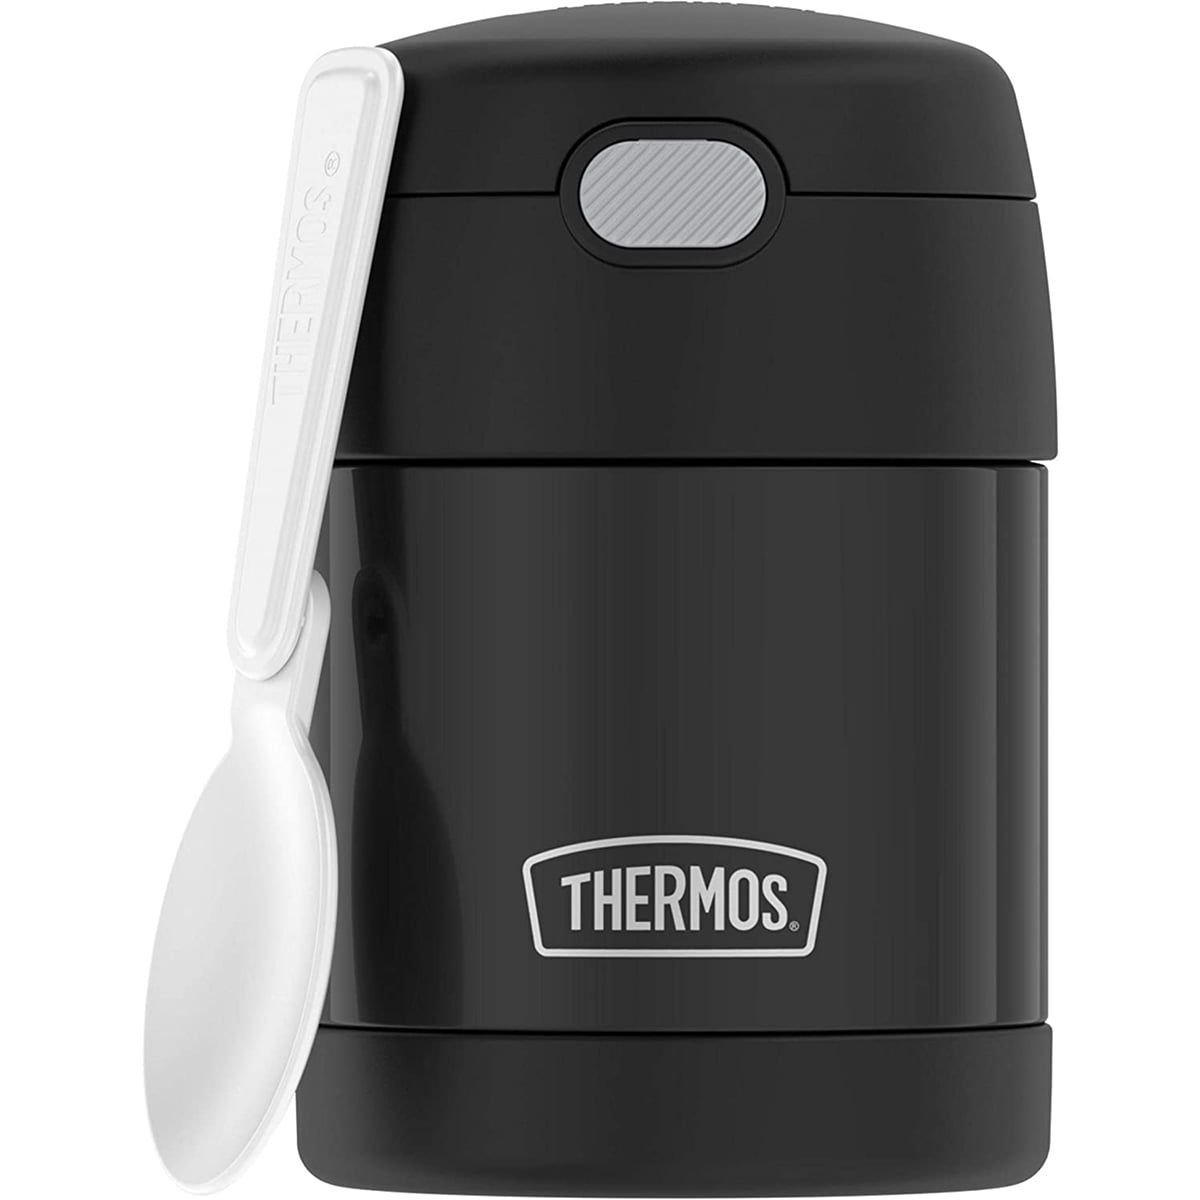 Thermos FUNtainer Lunch Set Bottle and Food Jar for Kids BPA Free